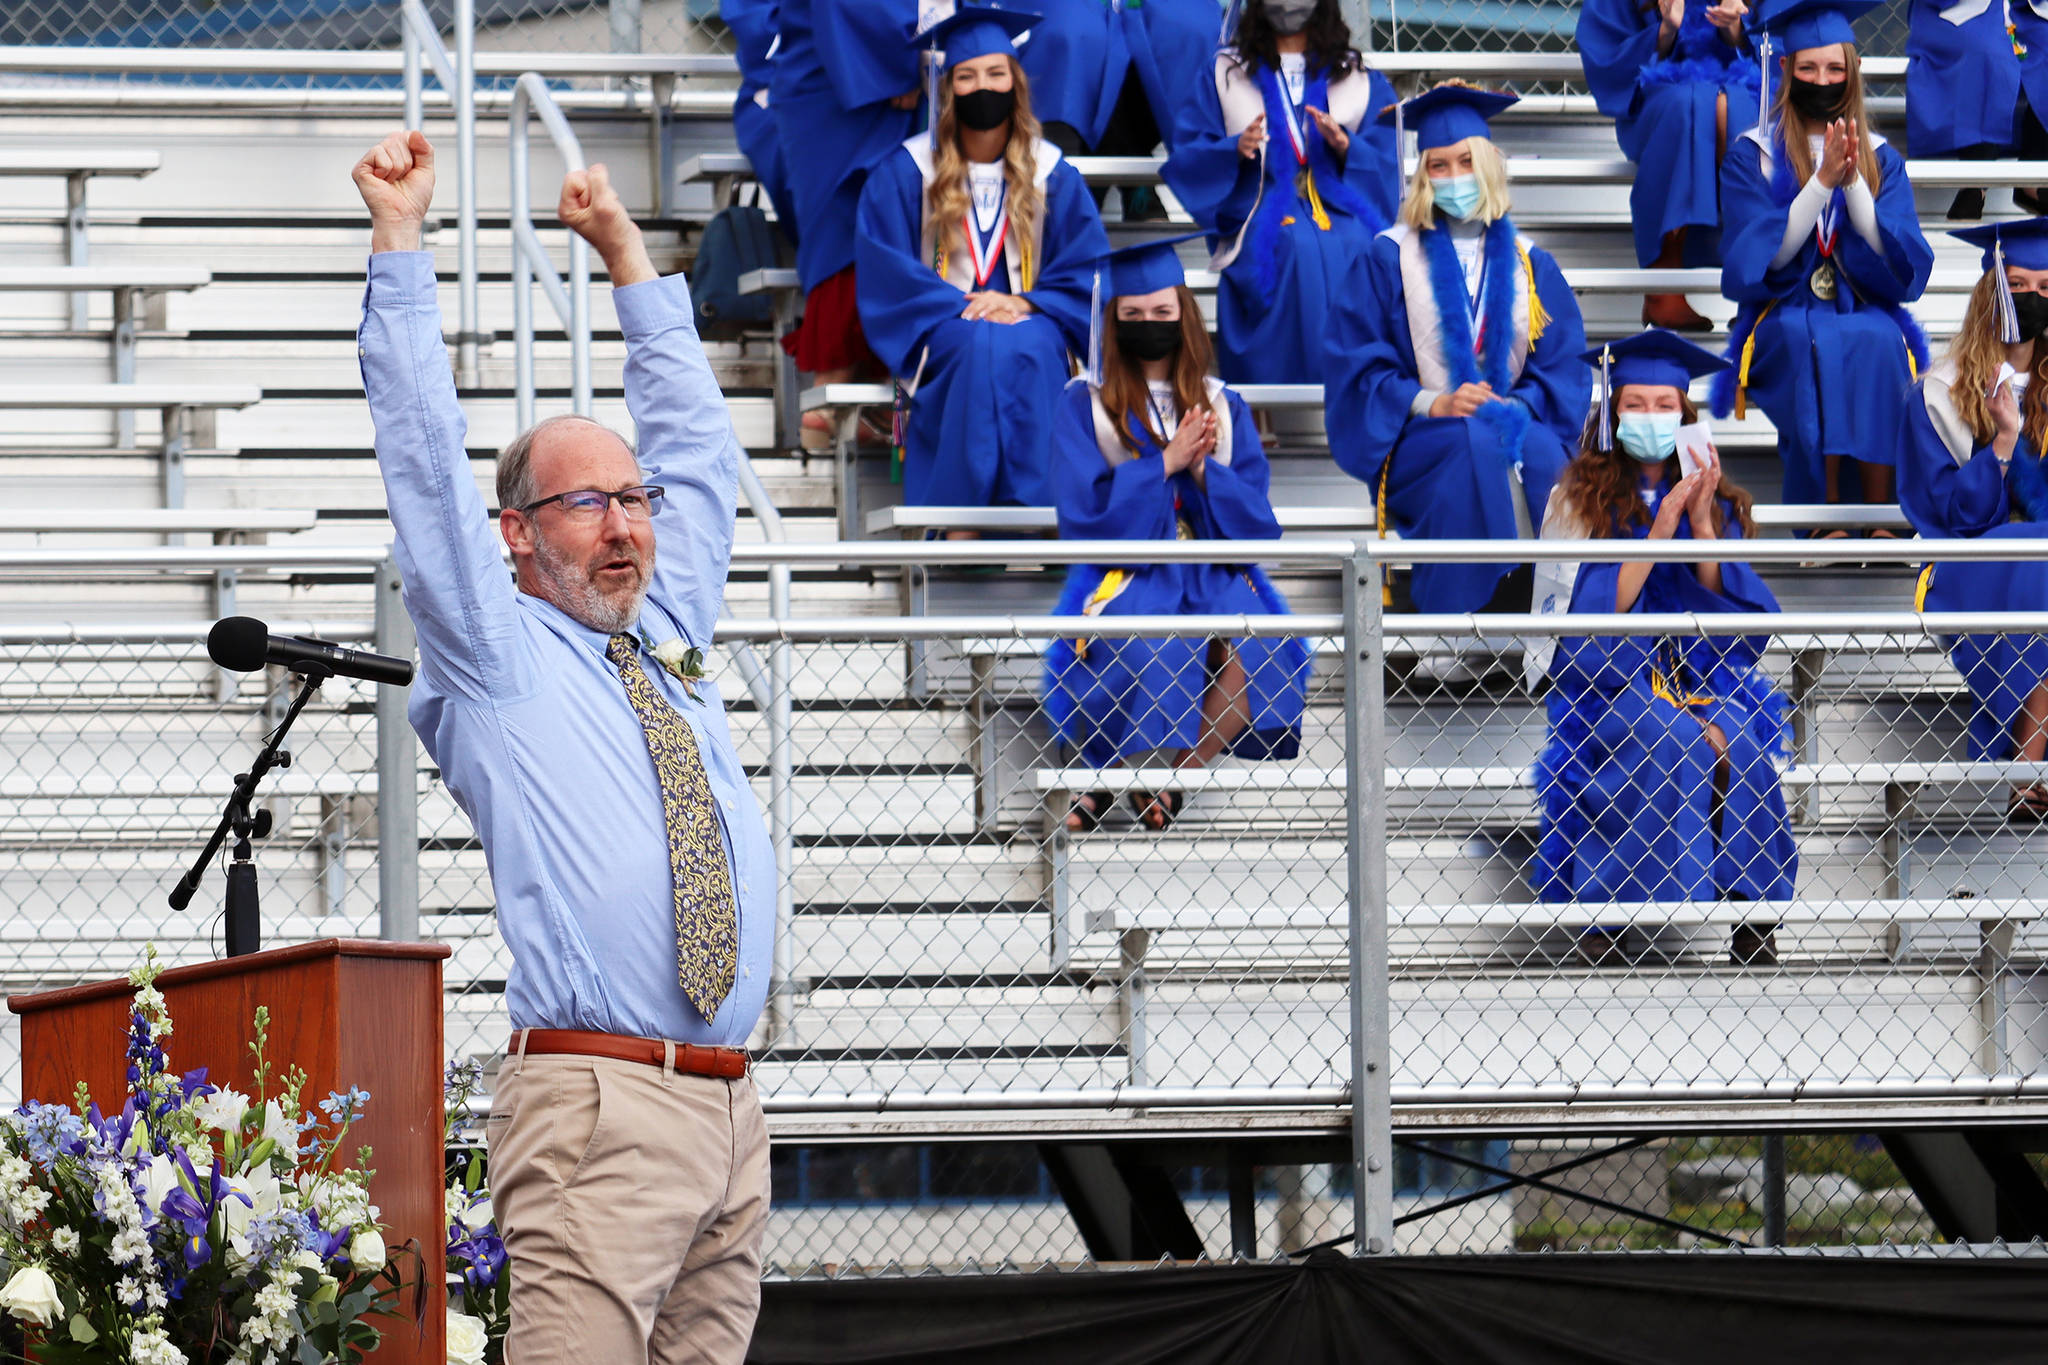 TMHS history teacher James Marks raises his arms in triumph after turning a cartwheel to begin his teacher address during the graduation ceremony held Sunday, May 23, 2021 at TMHS. Marks said while students may forget what he said, they’ll always remember the cartwheel. In his speech, Marks said the challenging school year had included gifts such as lives saved by distancing, science and technology, personal learning and strength. He advised students to always look for the helpers, as Fred Rogers said, not to let setbacks set them back and to work to create their own futures. (Ben Hohenstatt / Juneau Empire)